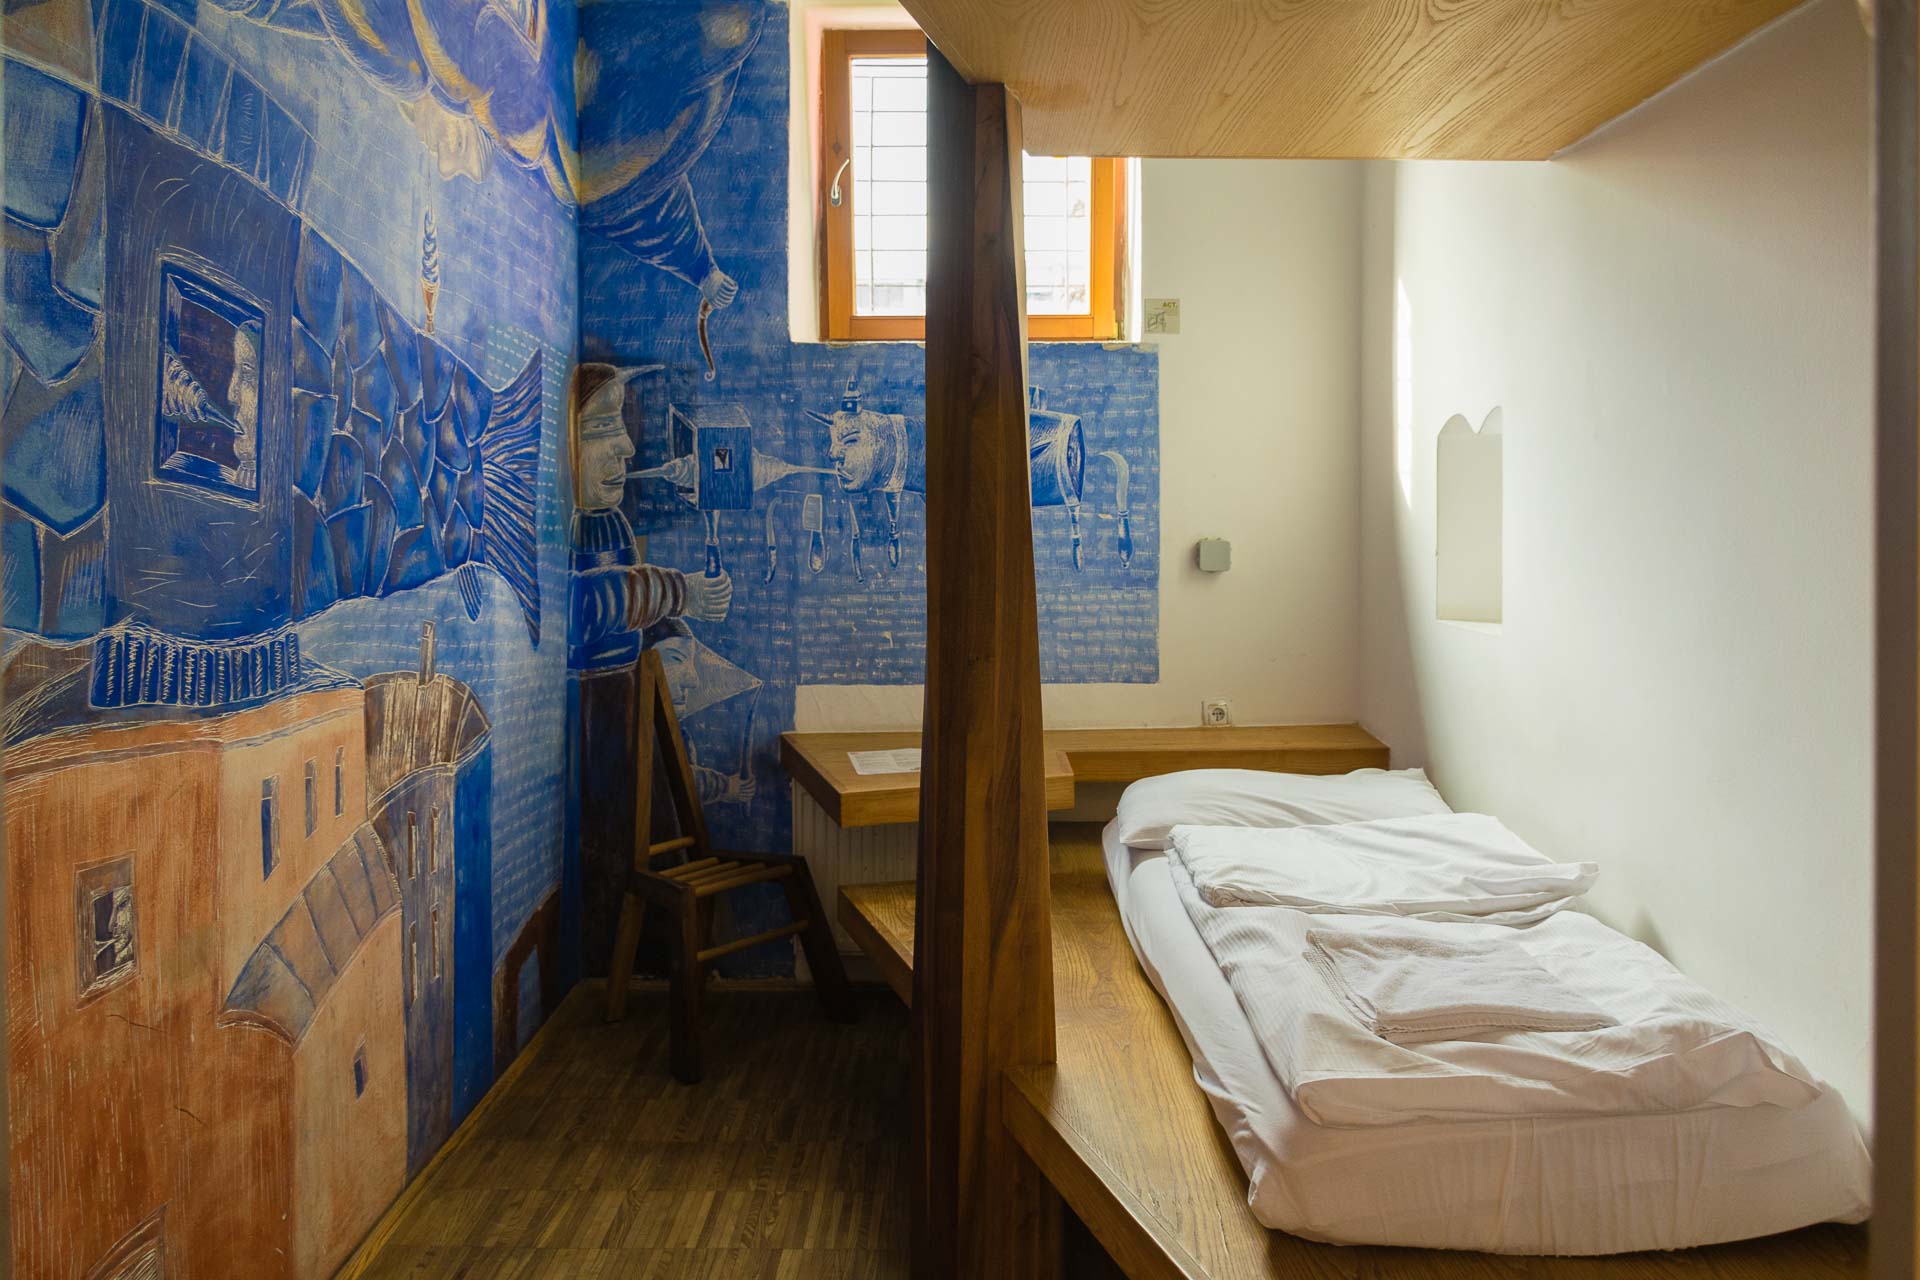 The room of Celica Hostel painted in blue